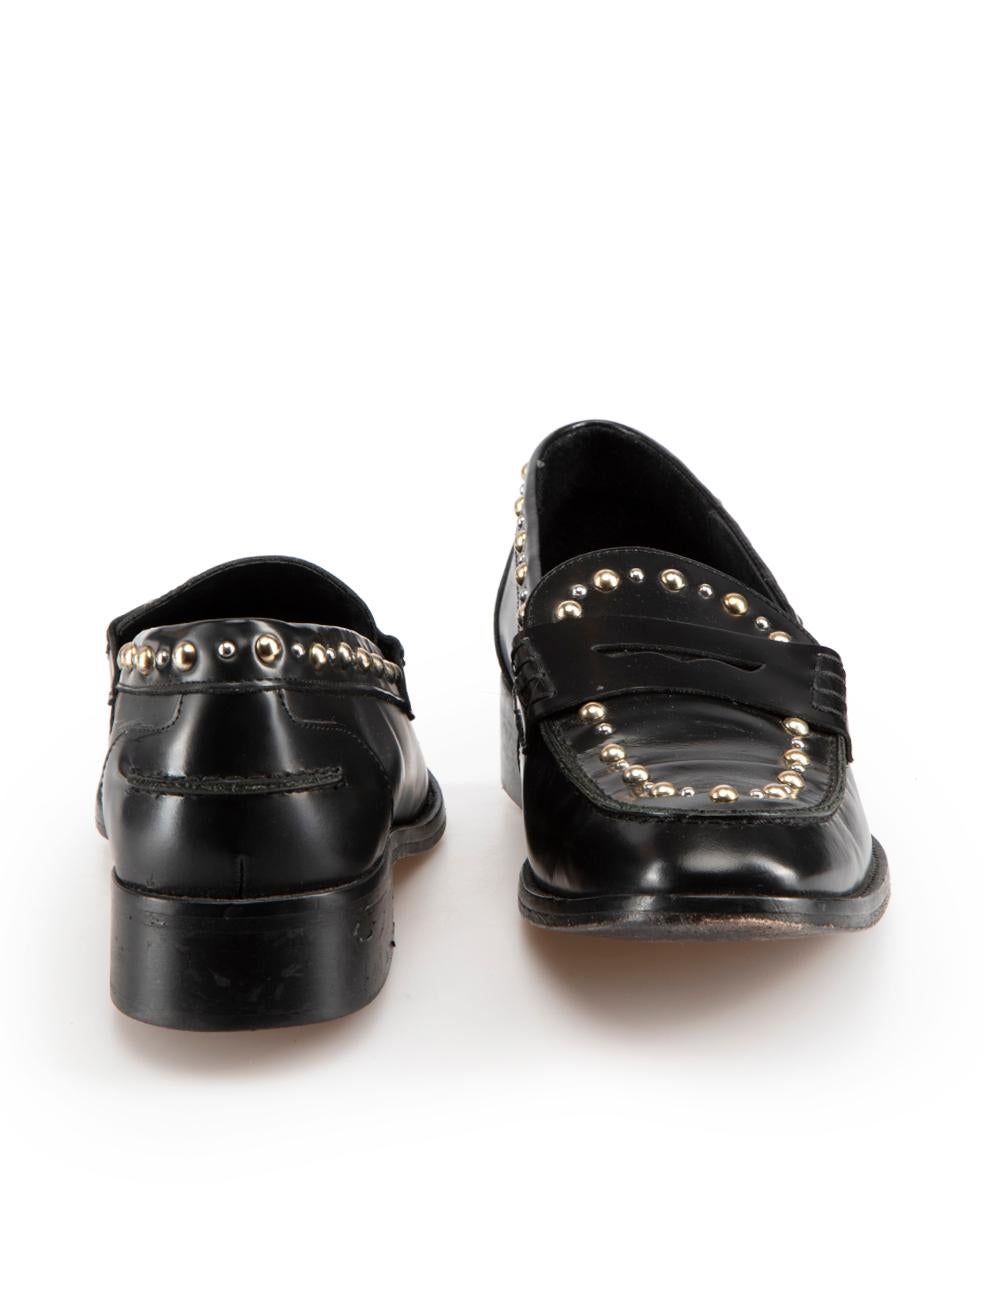 Maje Black Leather Studded Penny Loafers Size IT 40 In Good Condition For Sale In London, GB